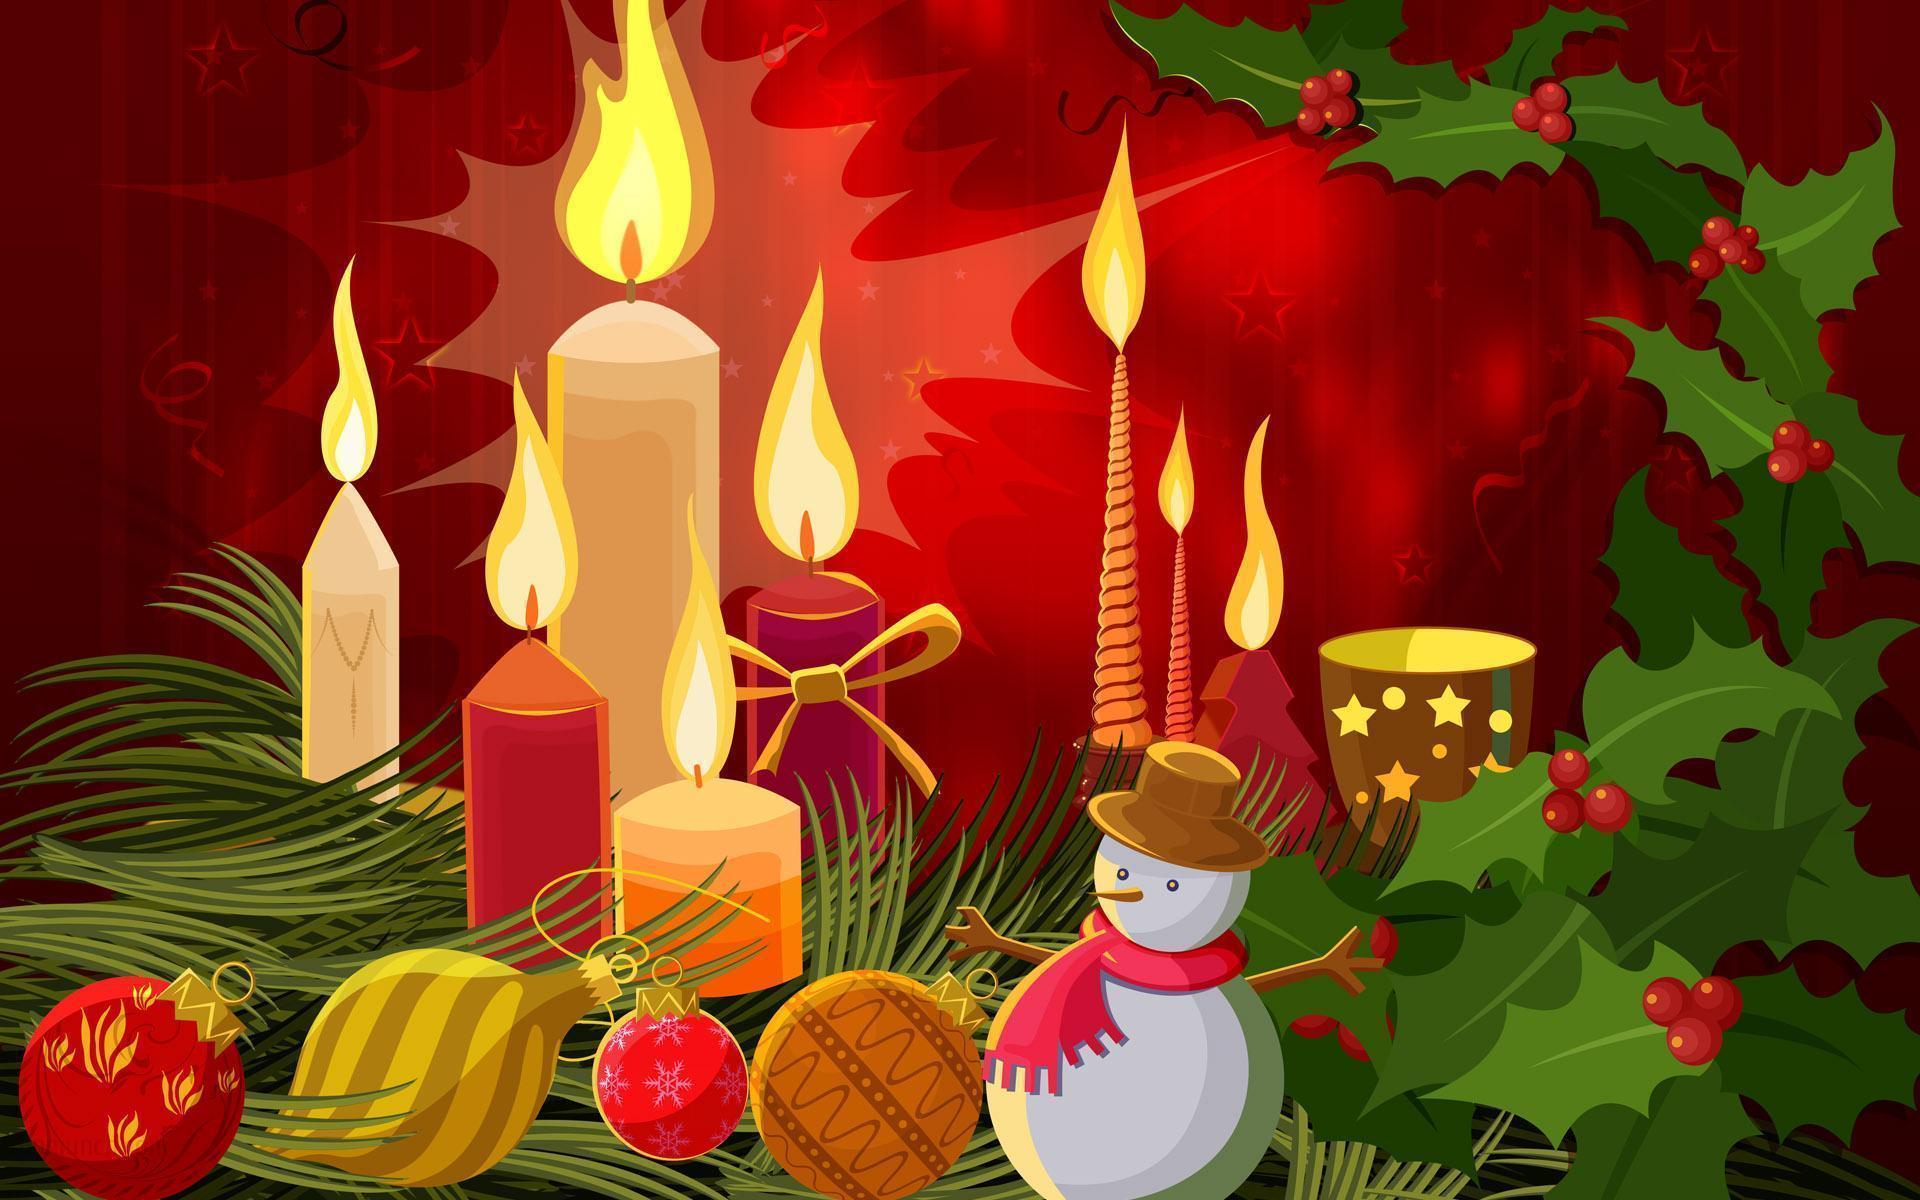 Staggering Free Holiday Wallpaper 1920x1200PX